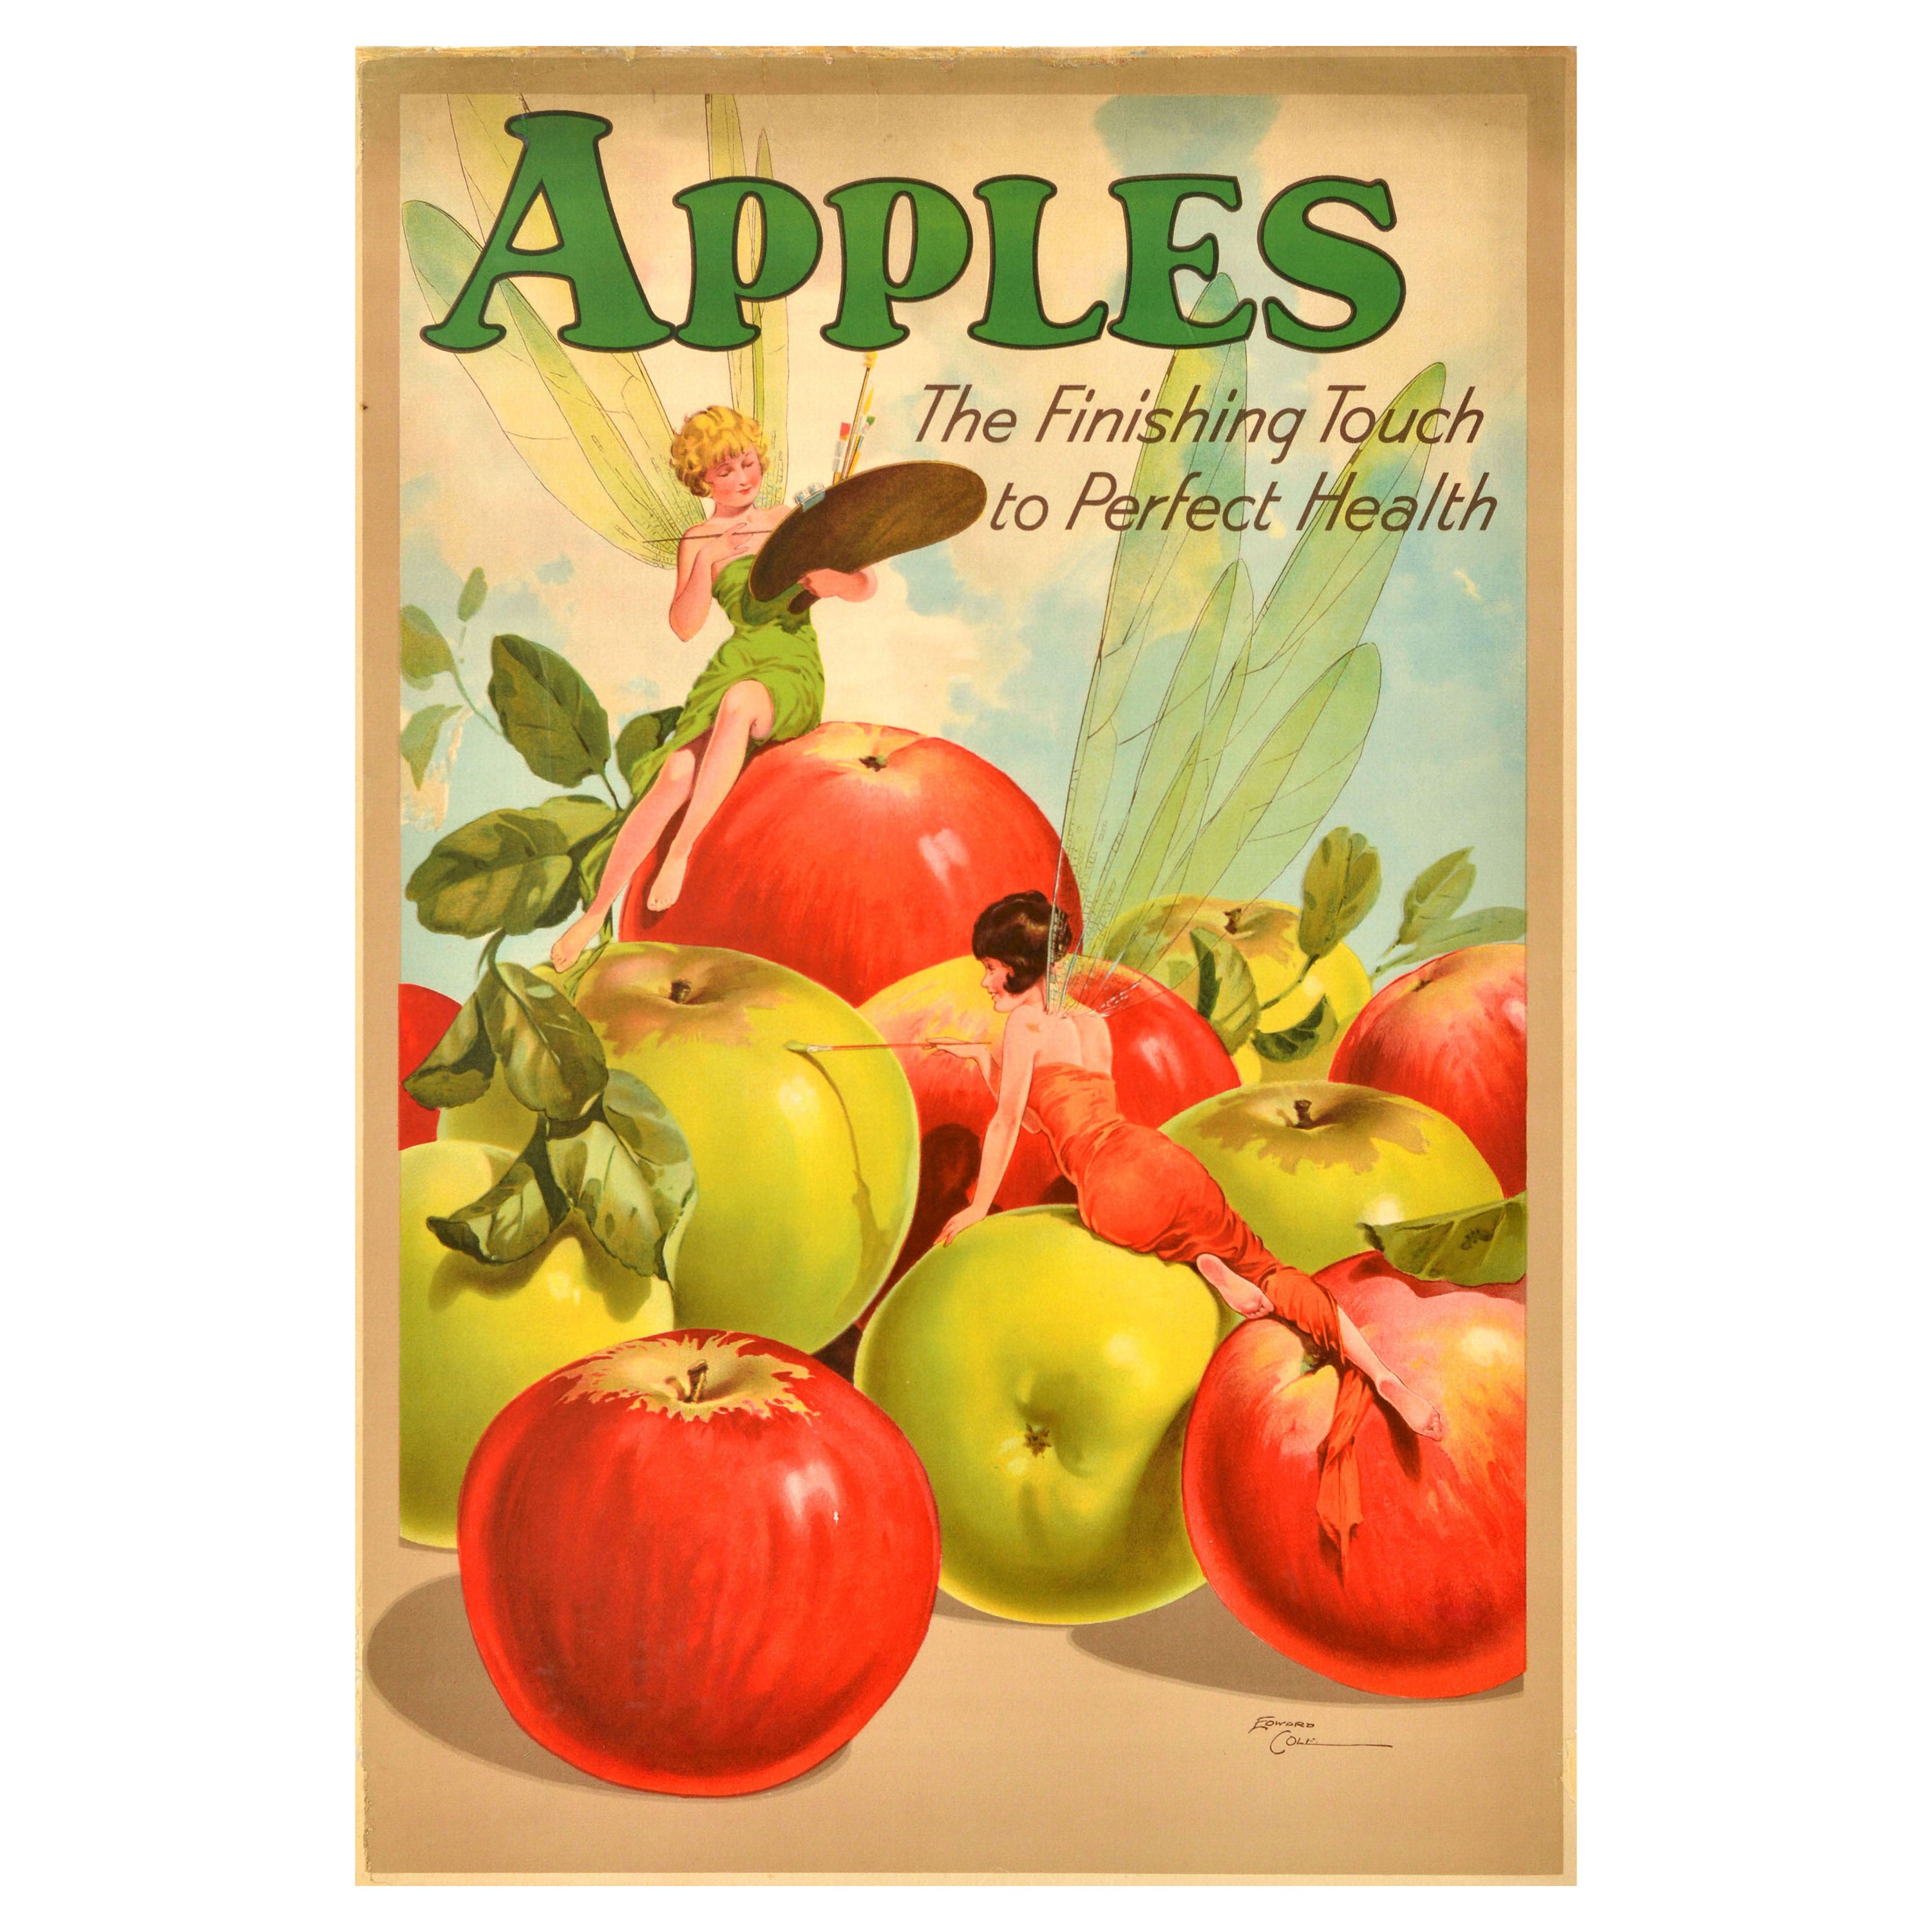 Original Vintage Food Advertising Poster Apples Finishing Touch Perfect Health For Sale